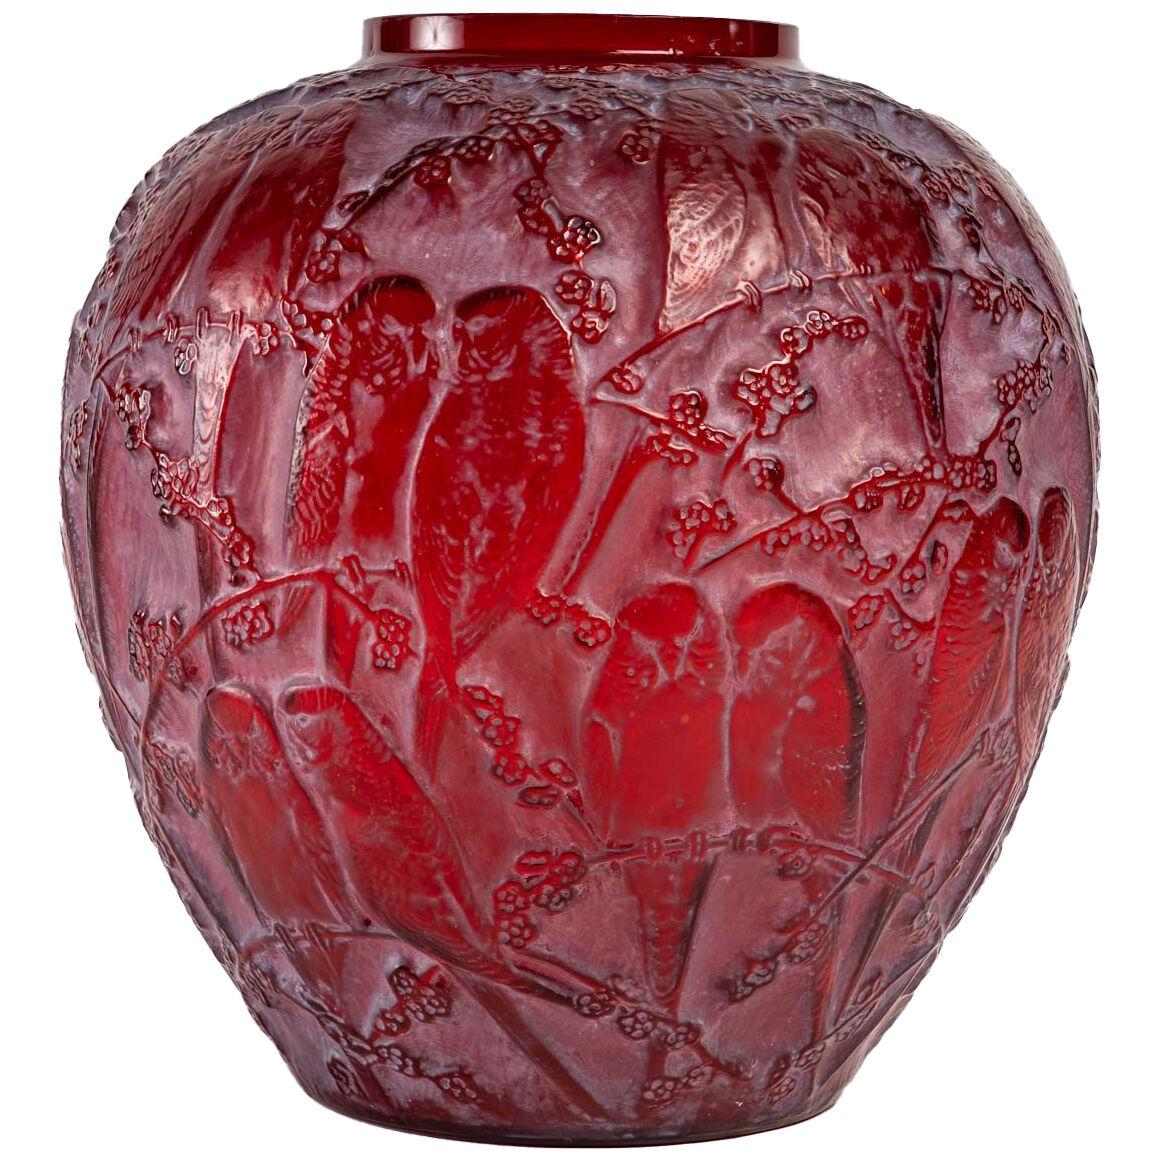 1919 Rene Lalique - Vase Perruches Cased Red Glass With White Patina